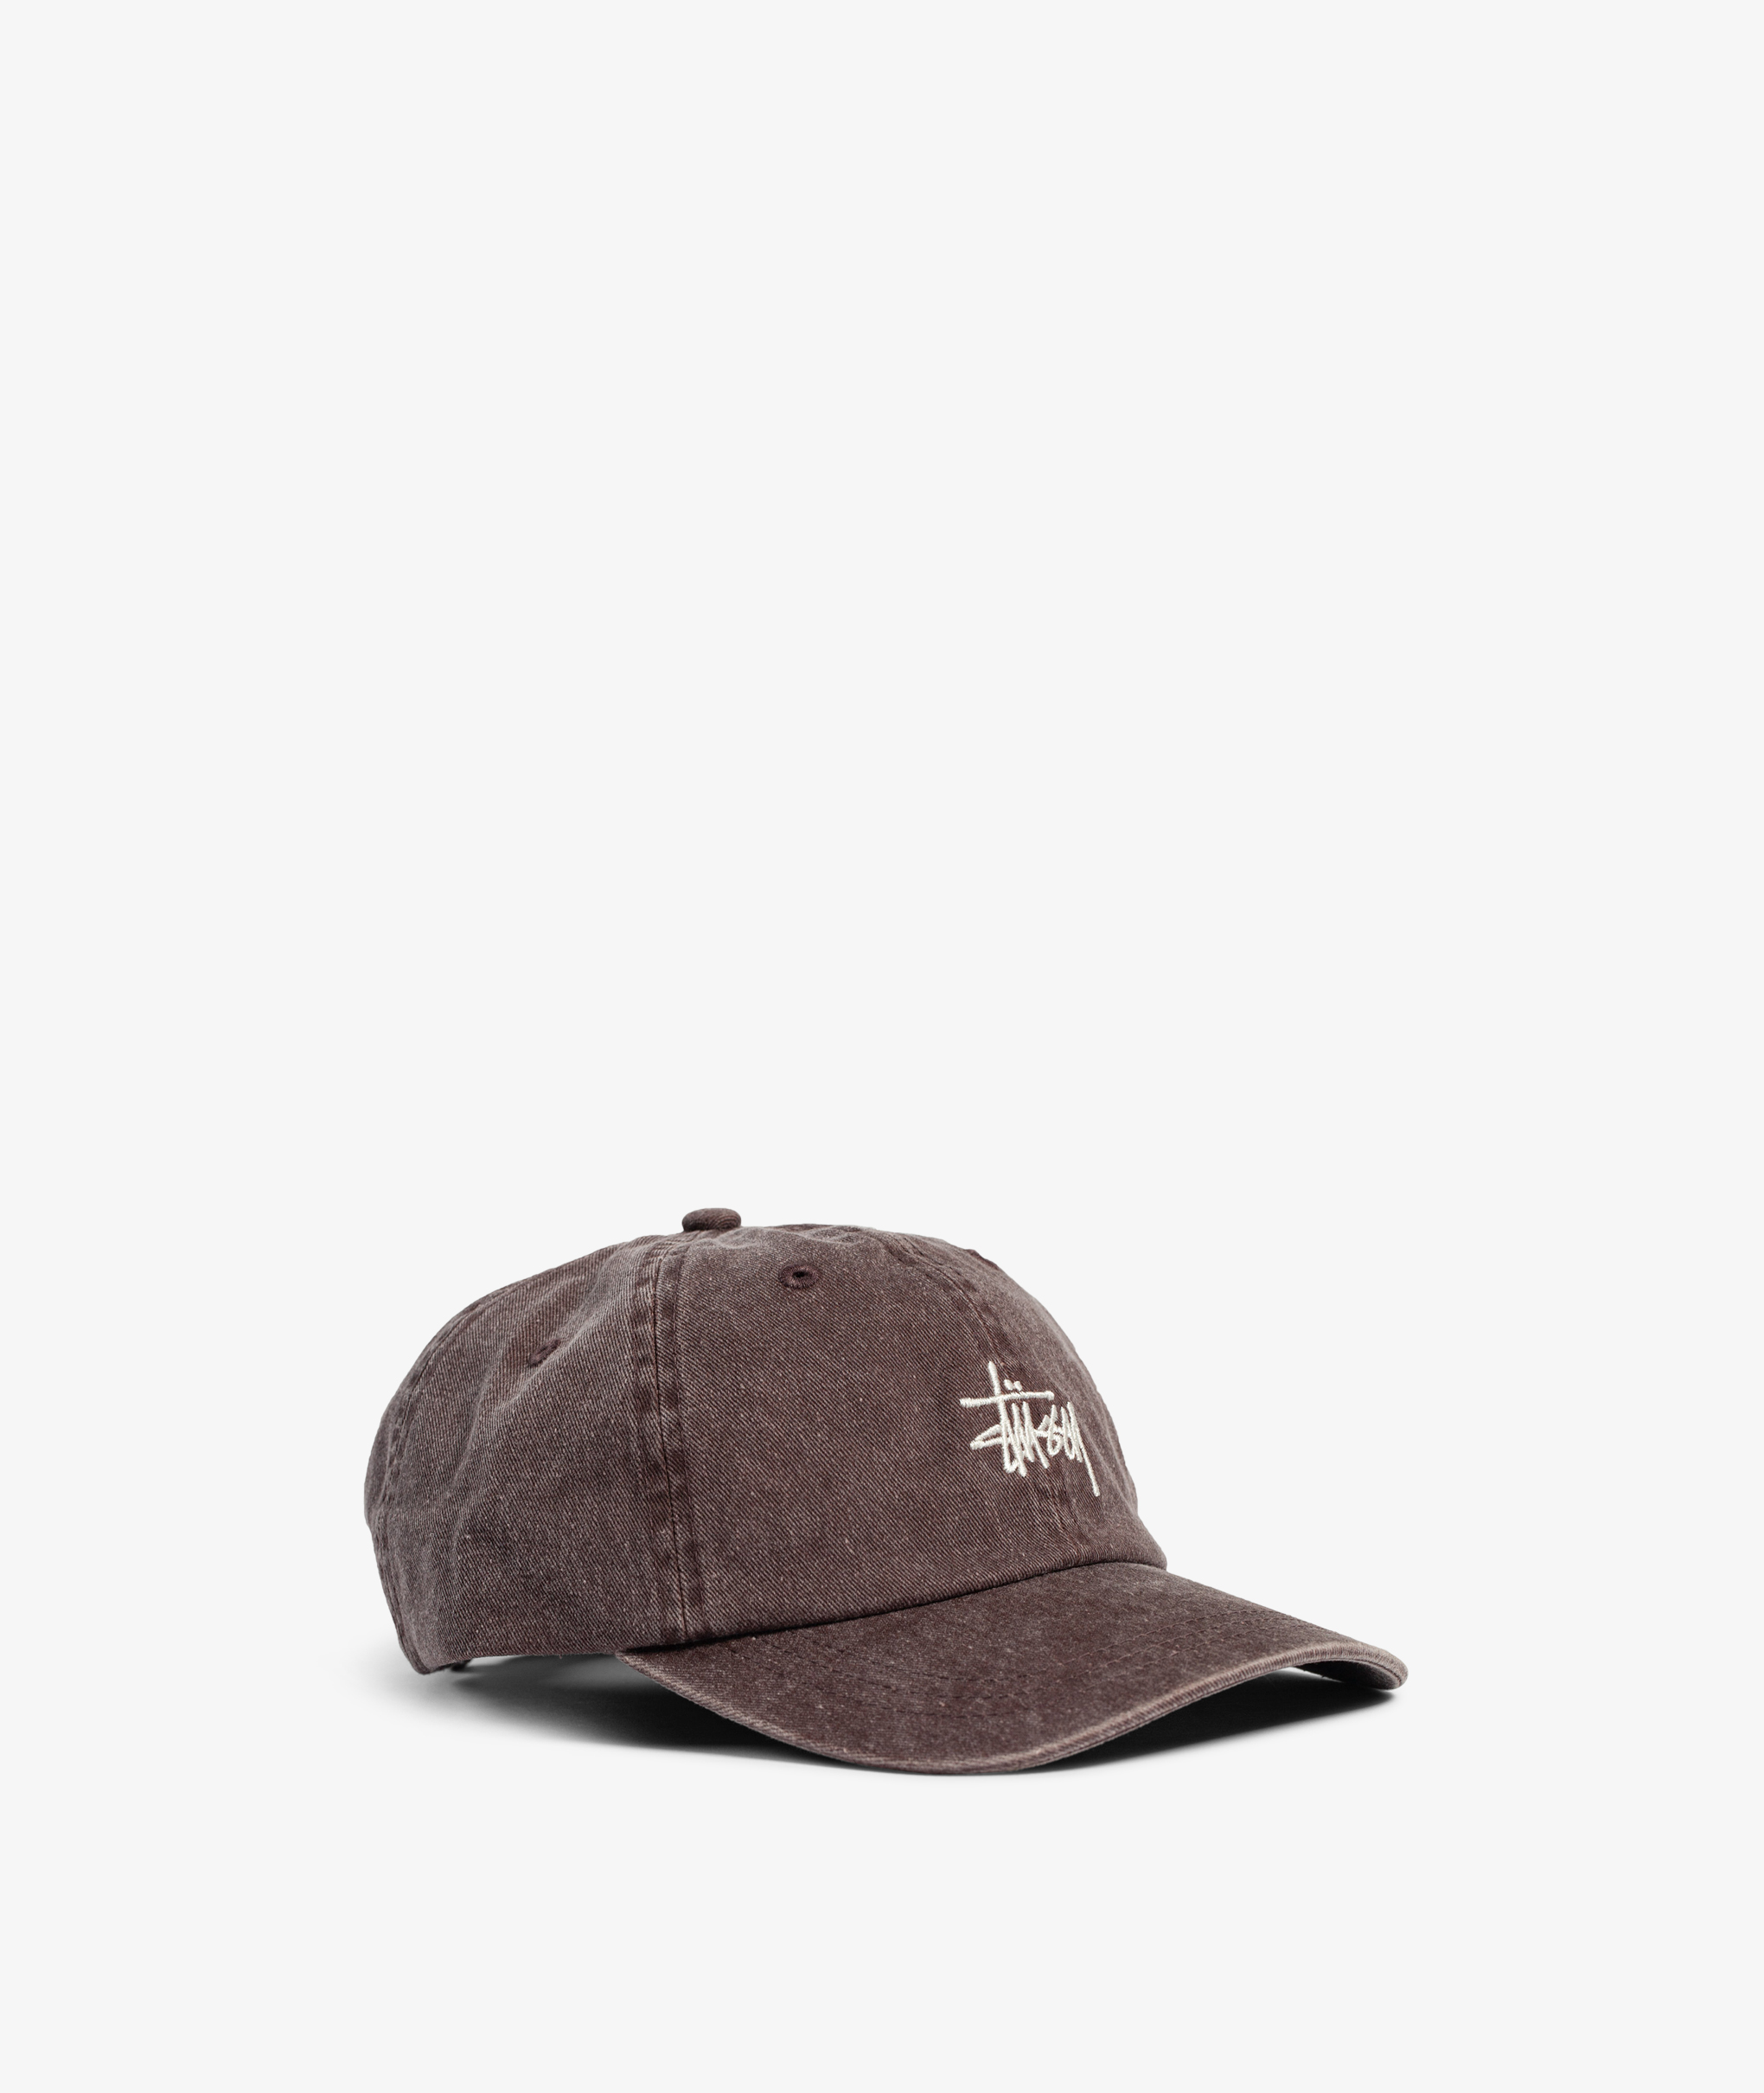 Norse Store | Shipping Worldwide - Stüssy Washed Stock Low Pro Cap - Brown